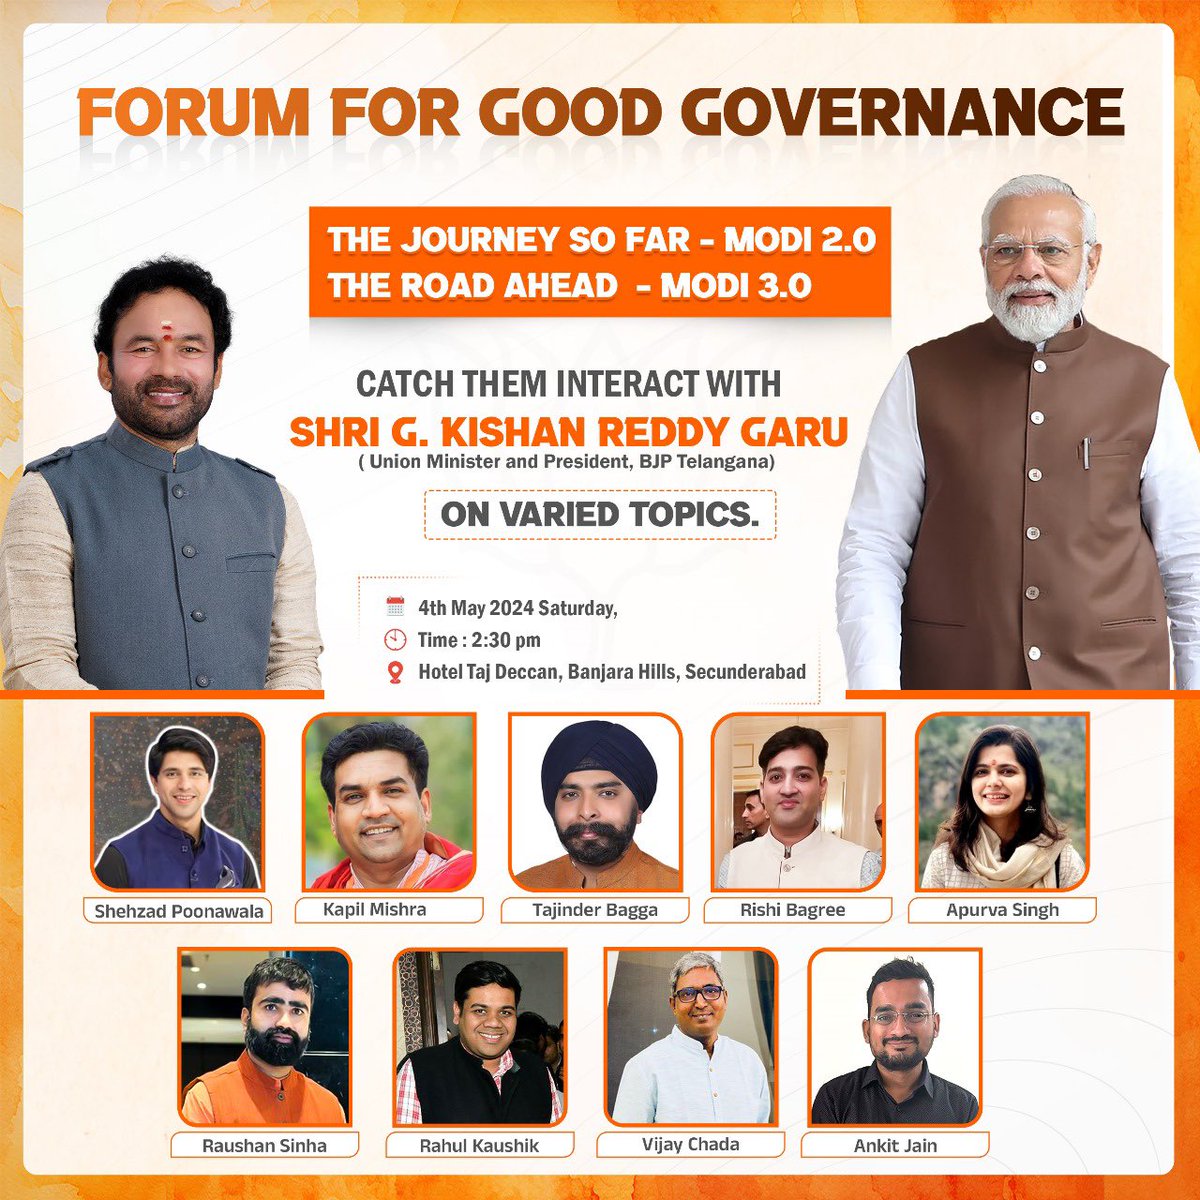 4th May

𝑯𝒐𝒏'𝒃𝒍𝒆 𝑼𝒏𝒊𝒐𝒏 𝑴𝒊𝒏 𝑲𝒊𝒔𝒉𝒂𝒏 𝑹𝒆𝒅𝒅𝒚 𝒋𝒊 will interact with @Shehzad_Ind @KapilMishra_IND @TajinderBagga @rishibagree and few others on 𝙏𝙝𝙚 𝙍𝙤𝙖𝙙 𝘼𝙝𝙚𝙖𝙙 - 𝙈𝙤𝙙𝙞 𝟯.𝟬. 

Do Join